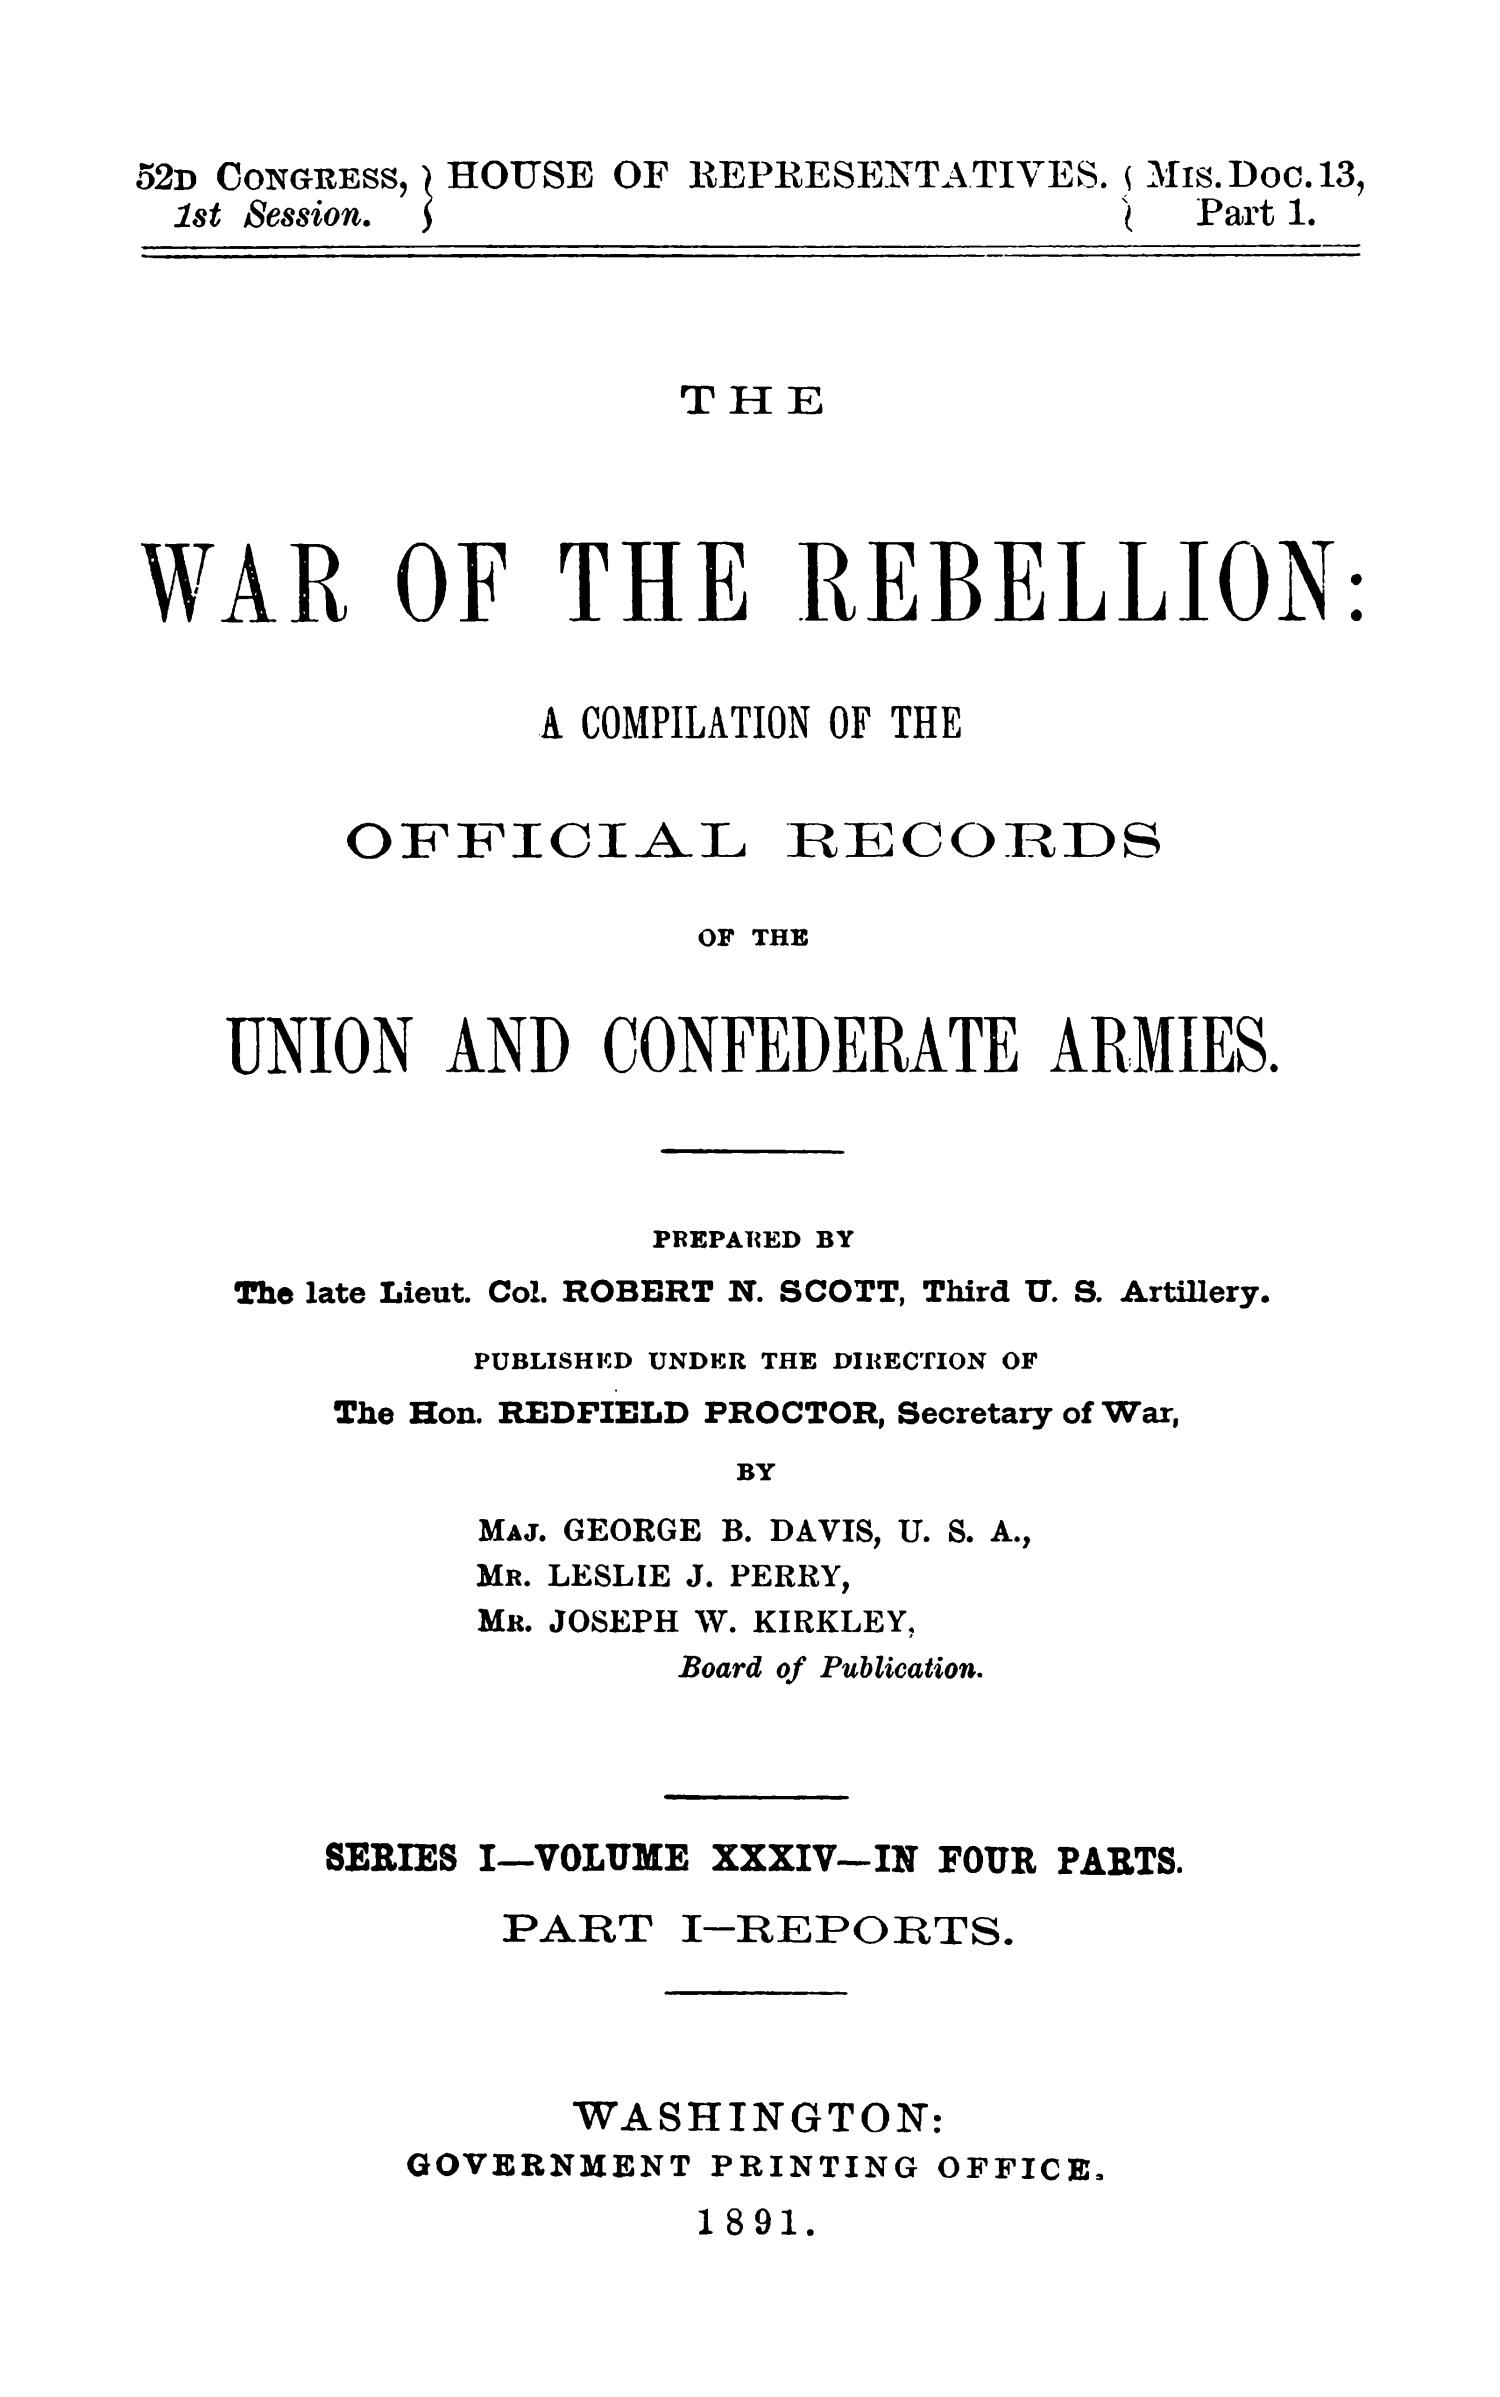 The War of the Rebellion: A Compilation of the Official Records of the Union And Confederate Armies. Series 1, Volume 34, In Four Parts. Part 1, Reports.
                                                
                                                    Title Page
                                                